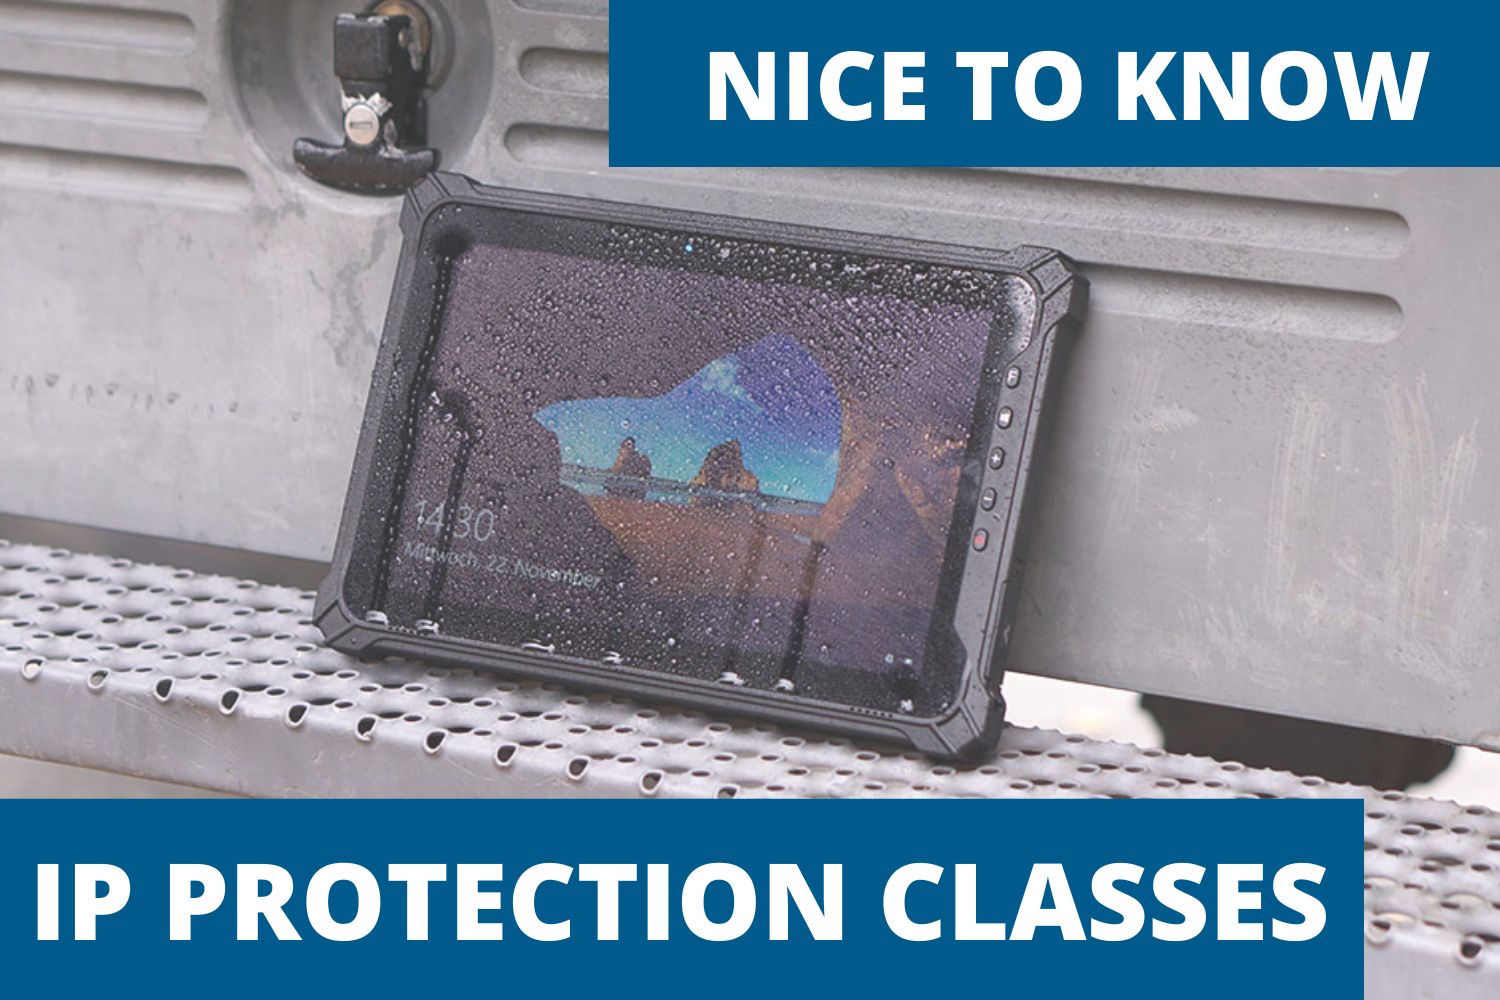 Nice to know: What are IP protection classes? 